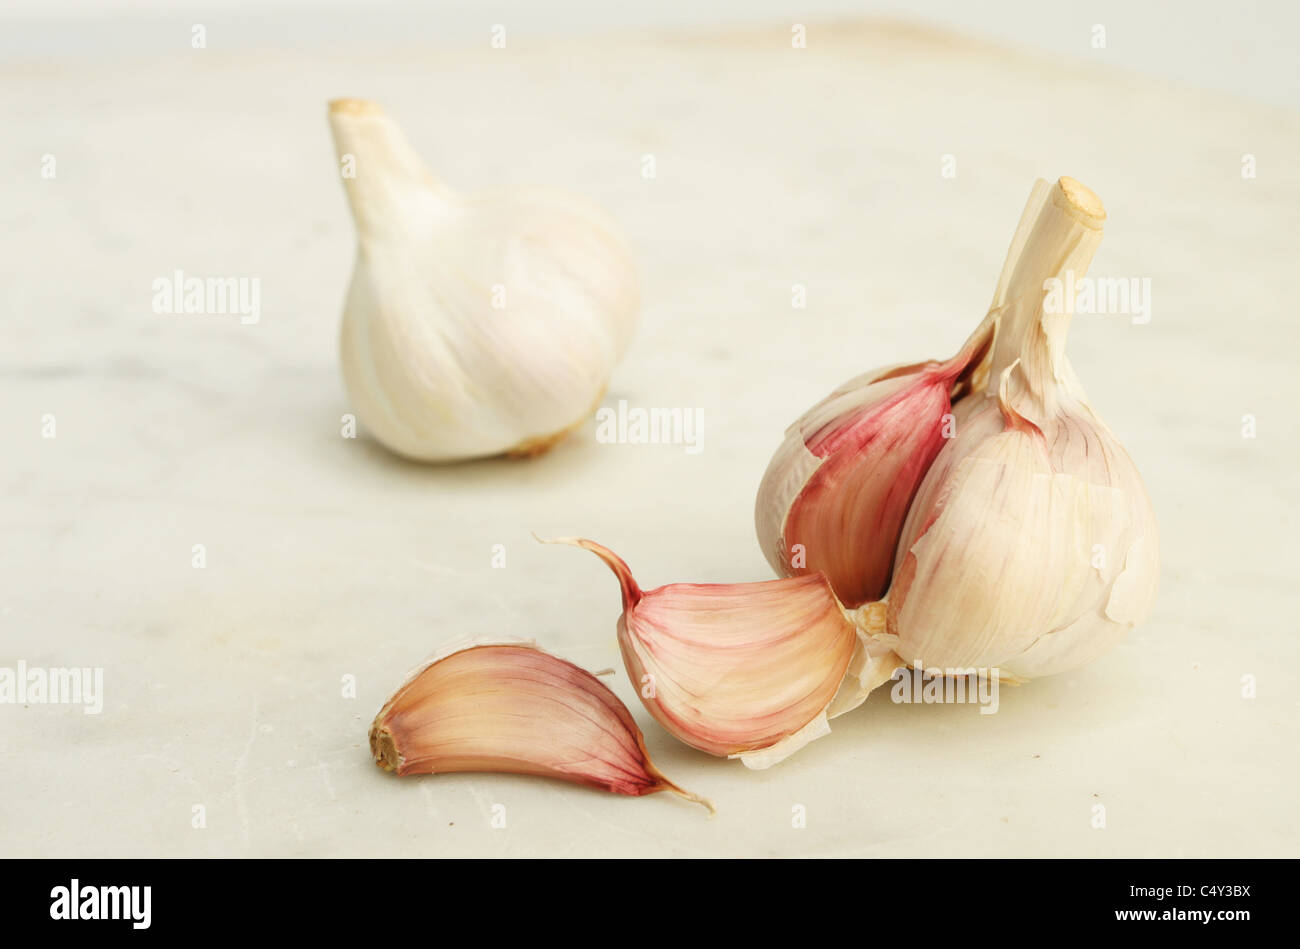 Garlic bulbs and cloves on a marble worktop with differential focus Stock Photo